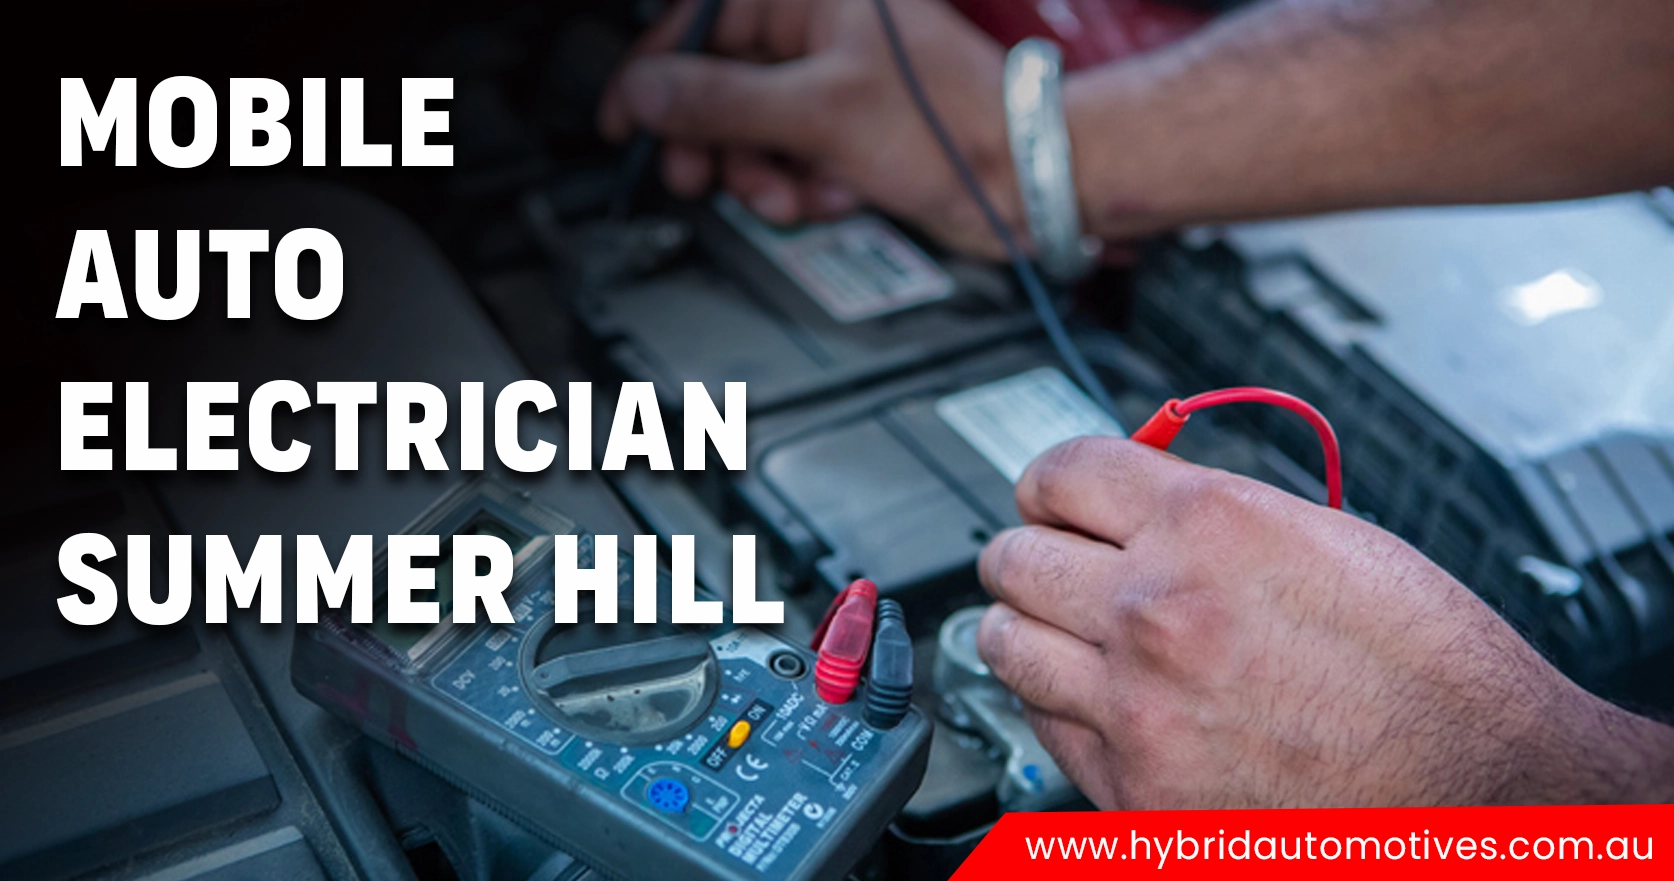 Mobile Auto Electrician Summer Hill